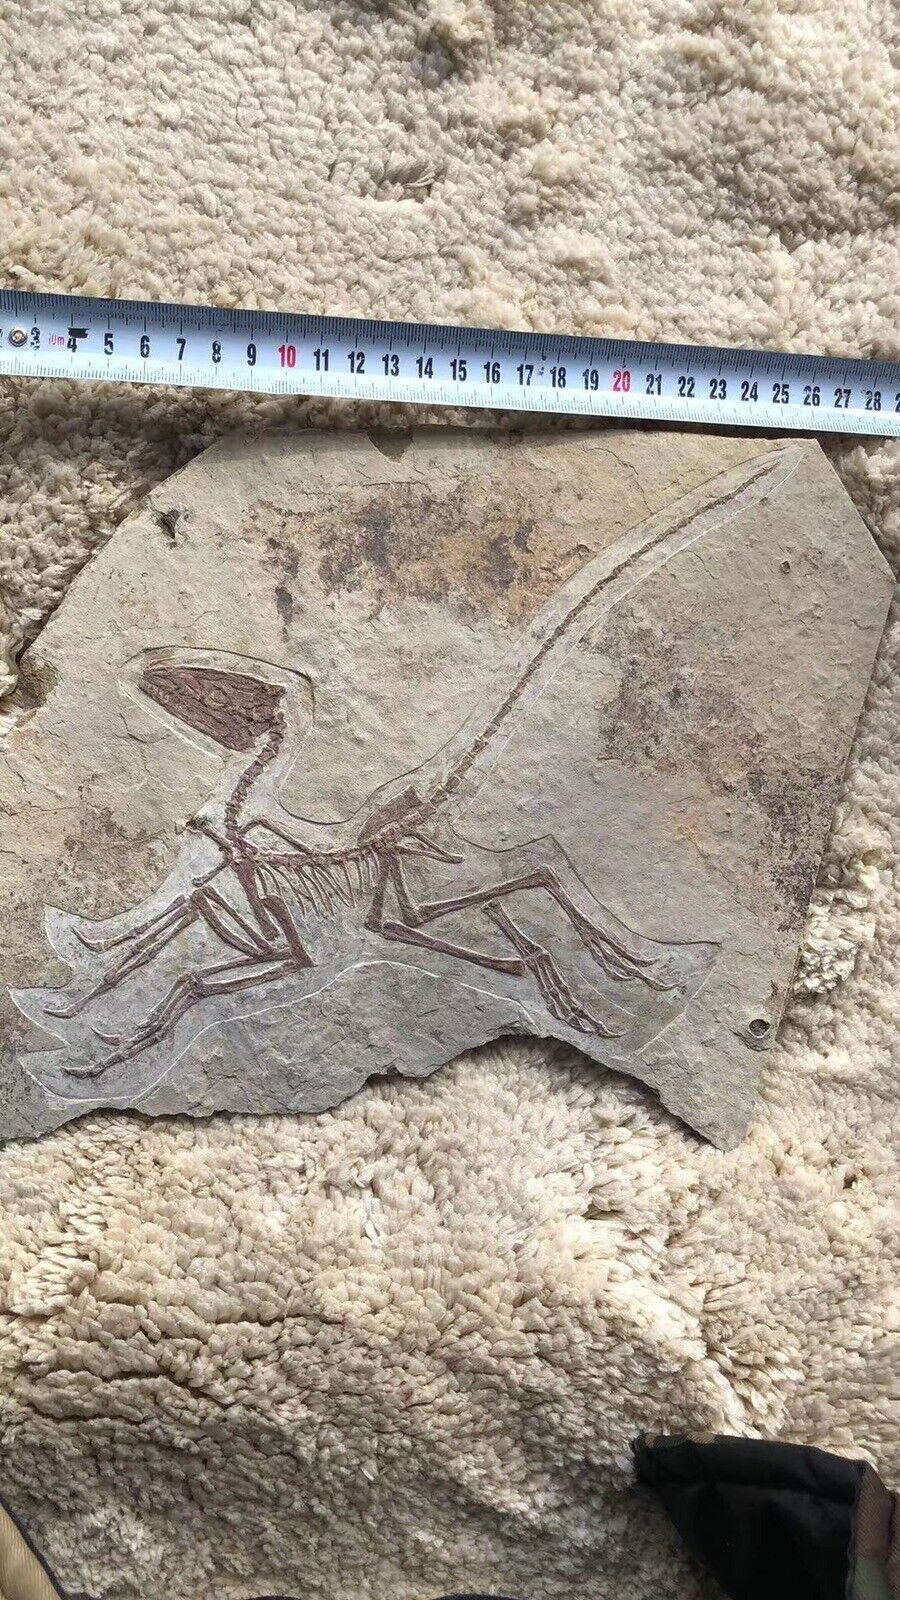 Model……Rare Chinese Best Triassic  Anchiornis huxleyi      Dinosaur fossil